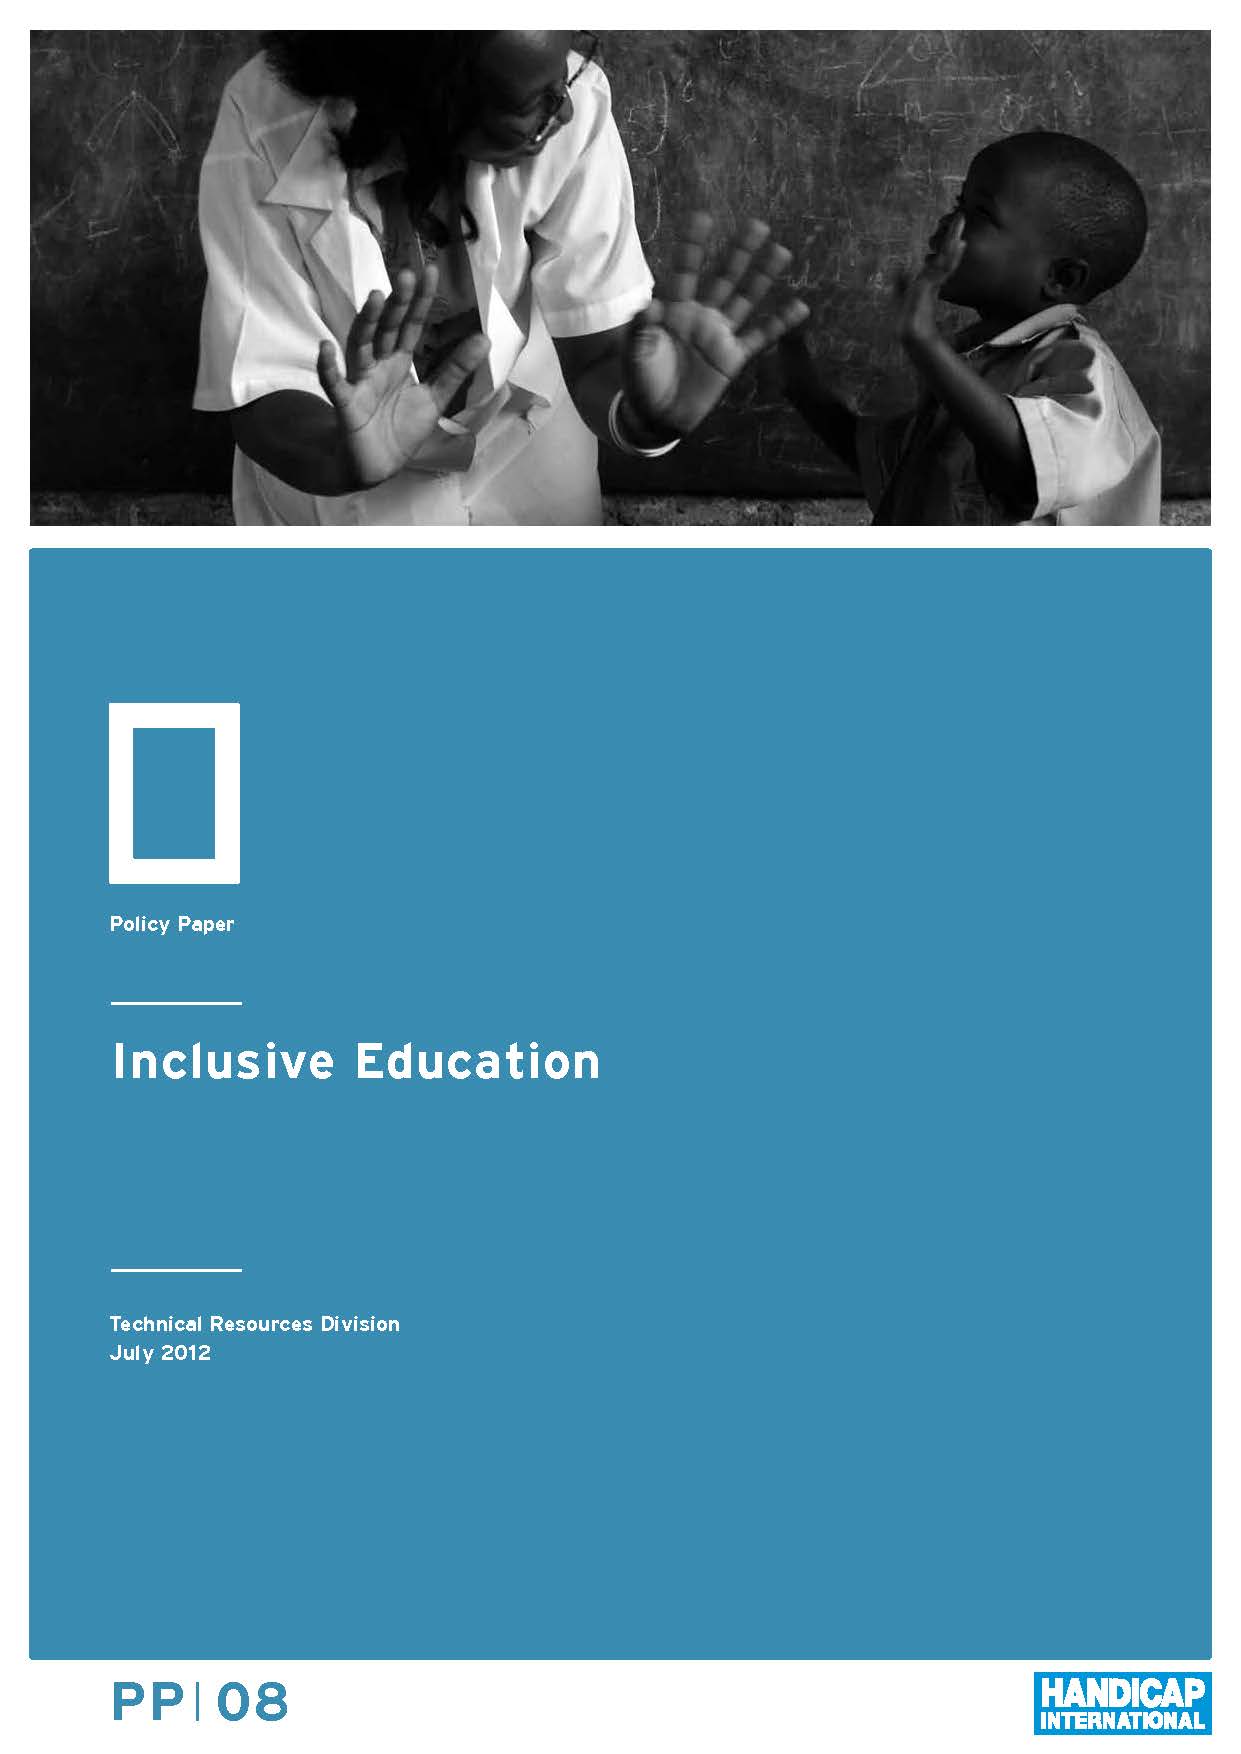 Humanity and Inclusion, Inclusive education